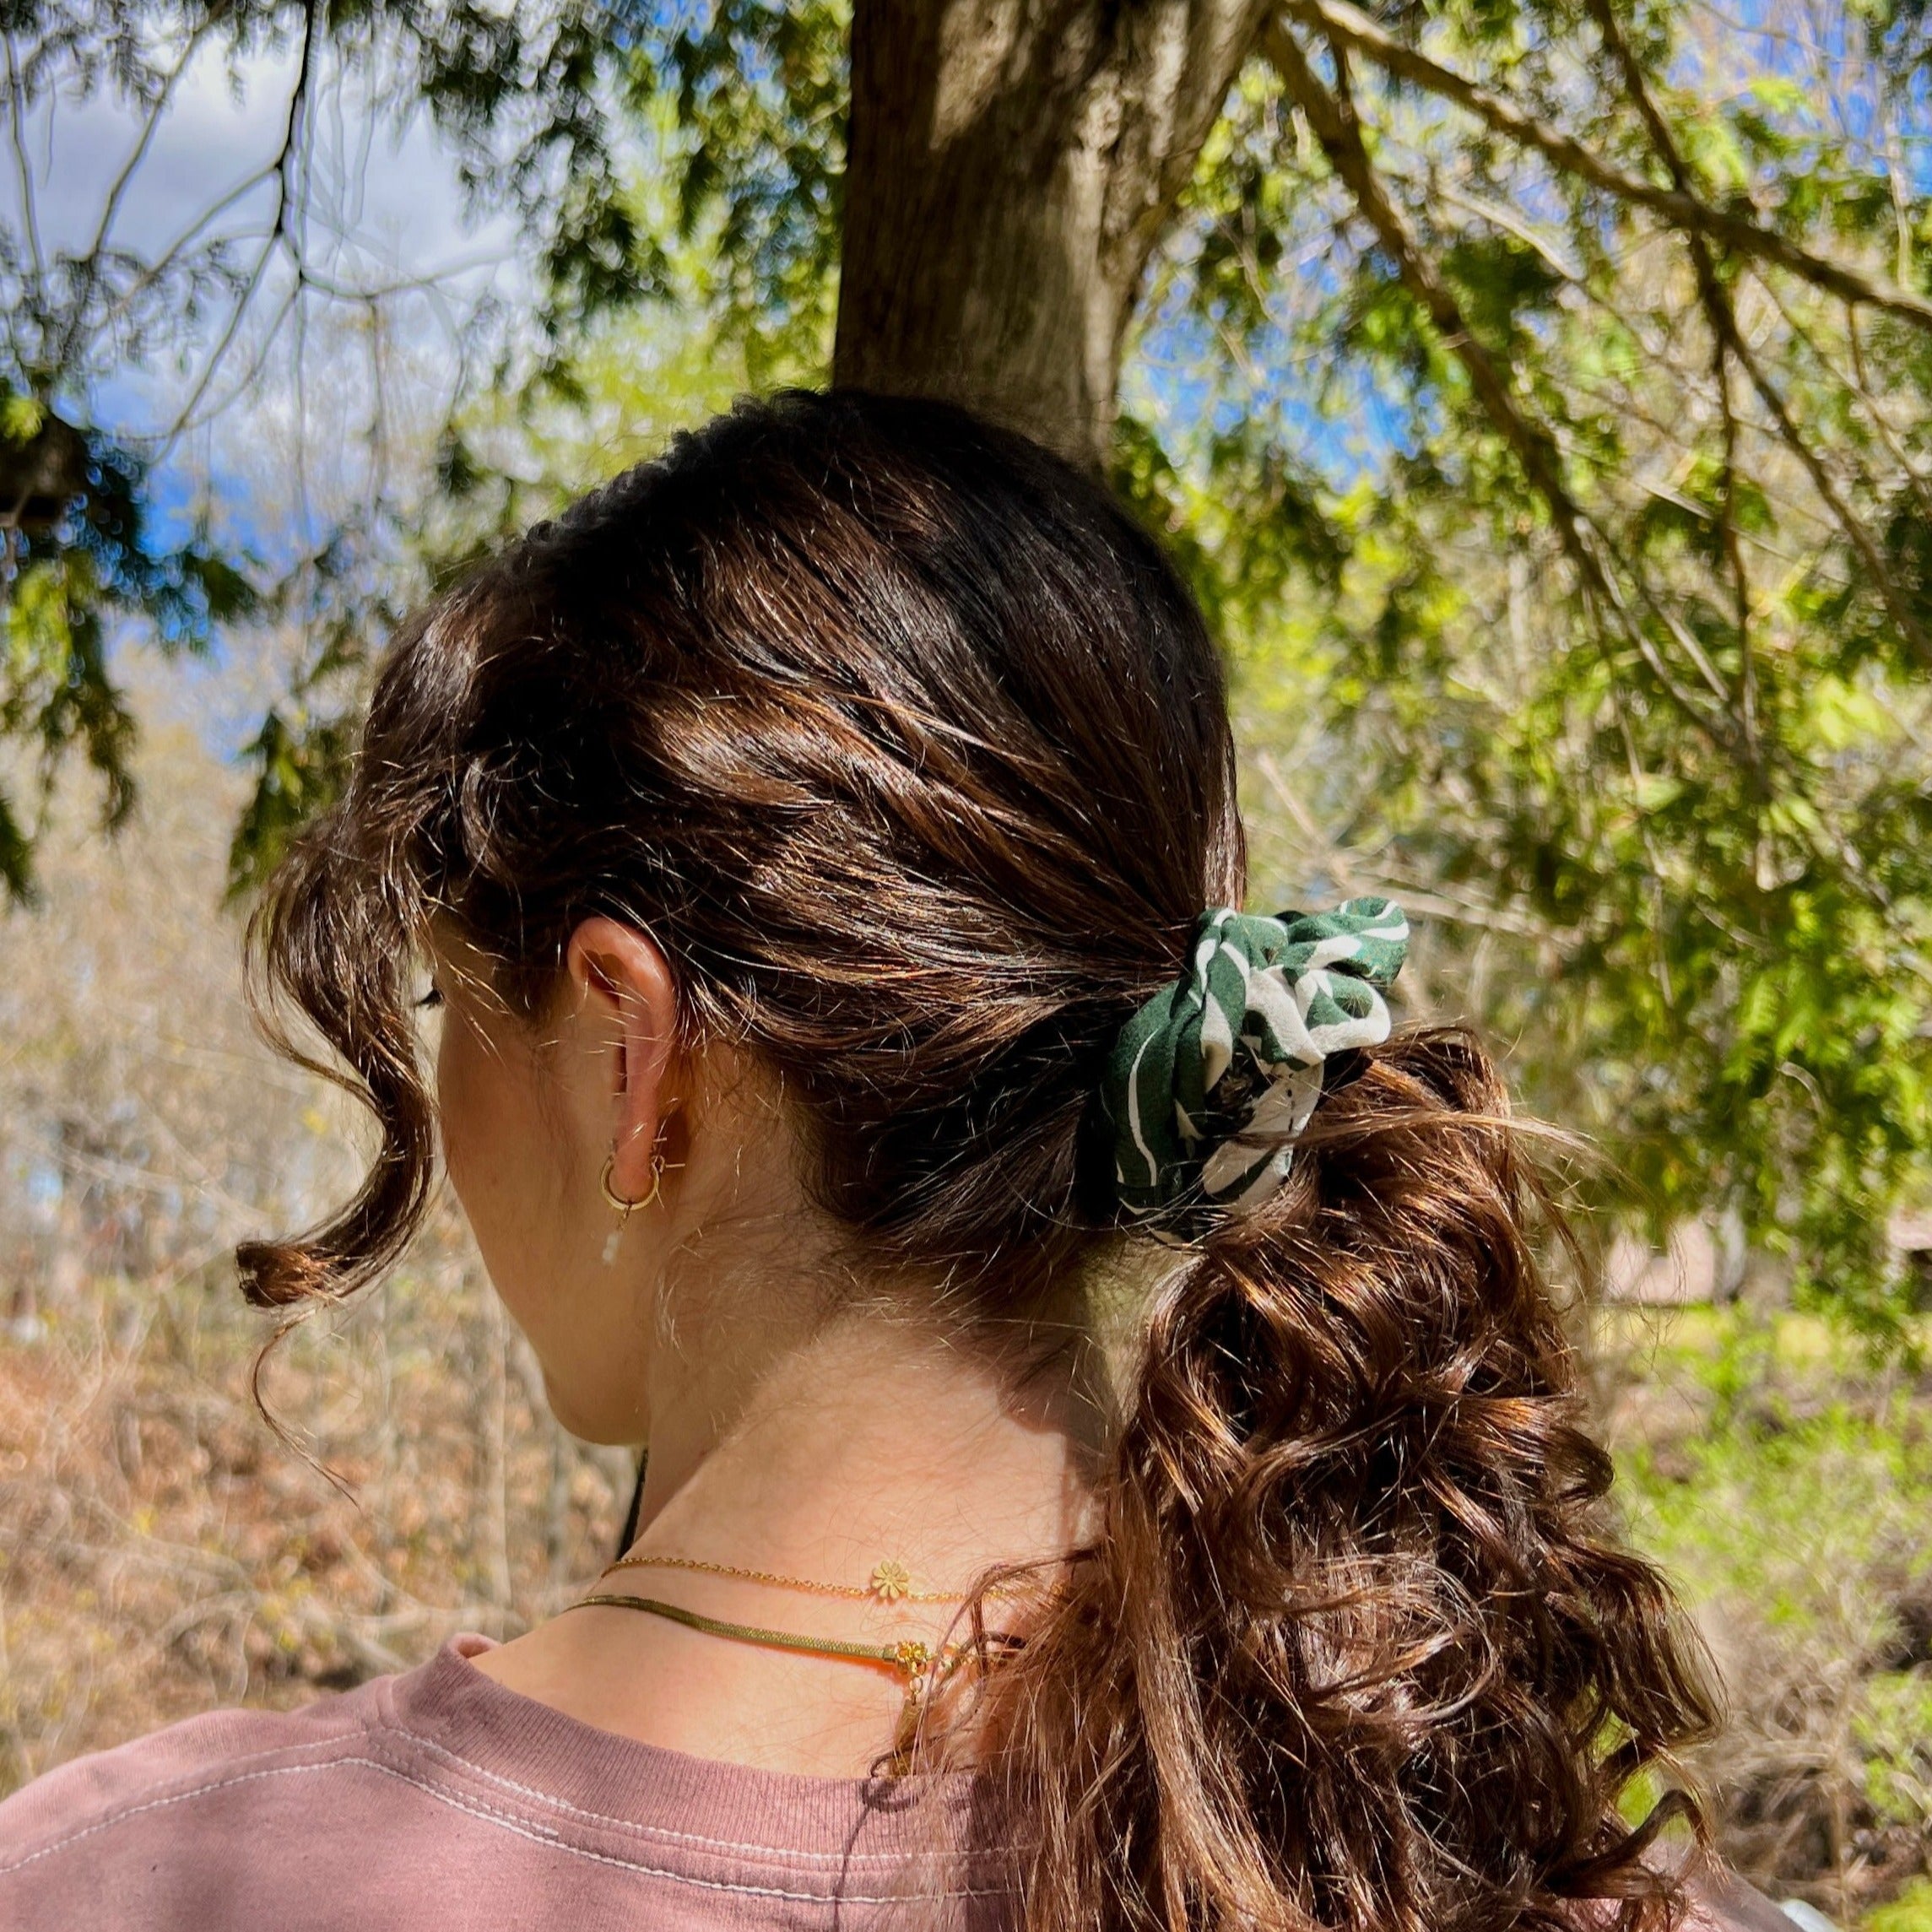 Be-Leaf in Yourself Scrunchie